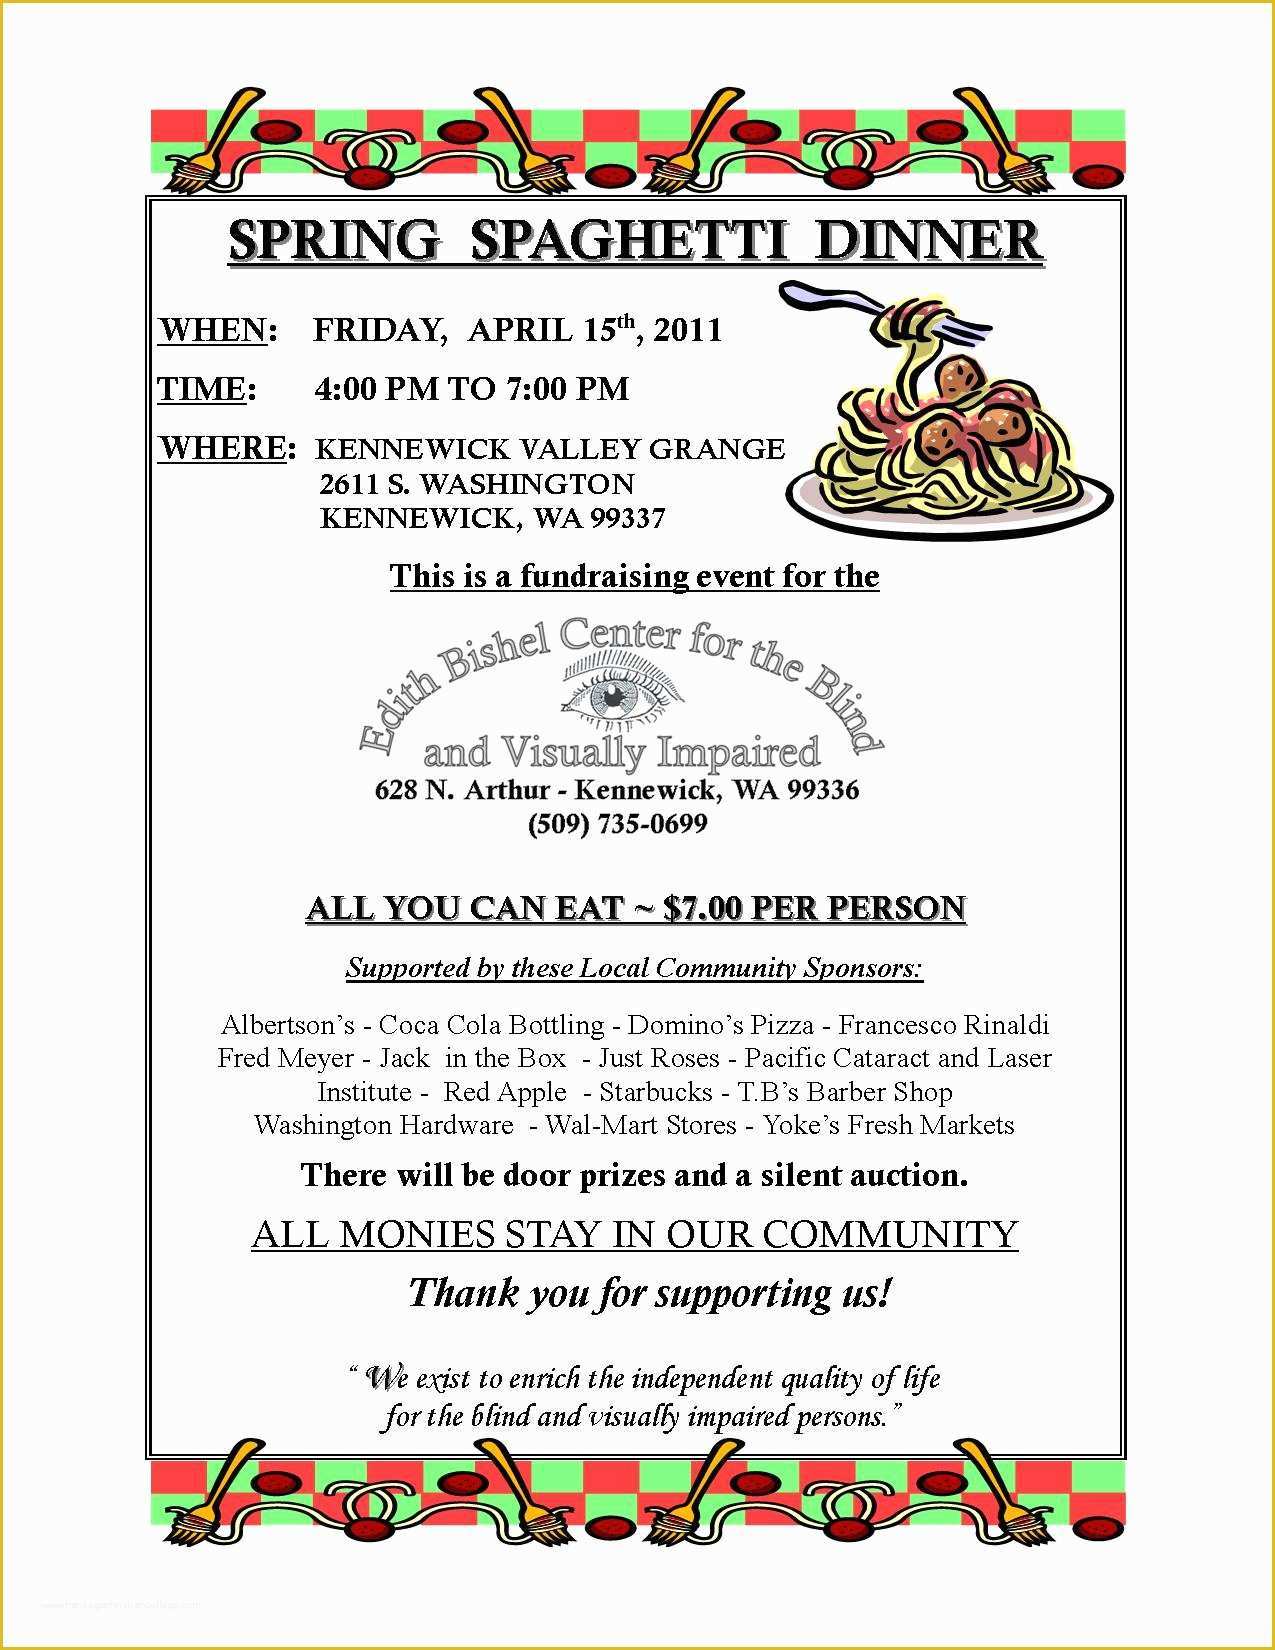 Fundraising Poster Template Free Of Spaghetti Dinner Flyer Template Yourweek 198bddeca25e